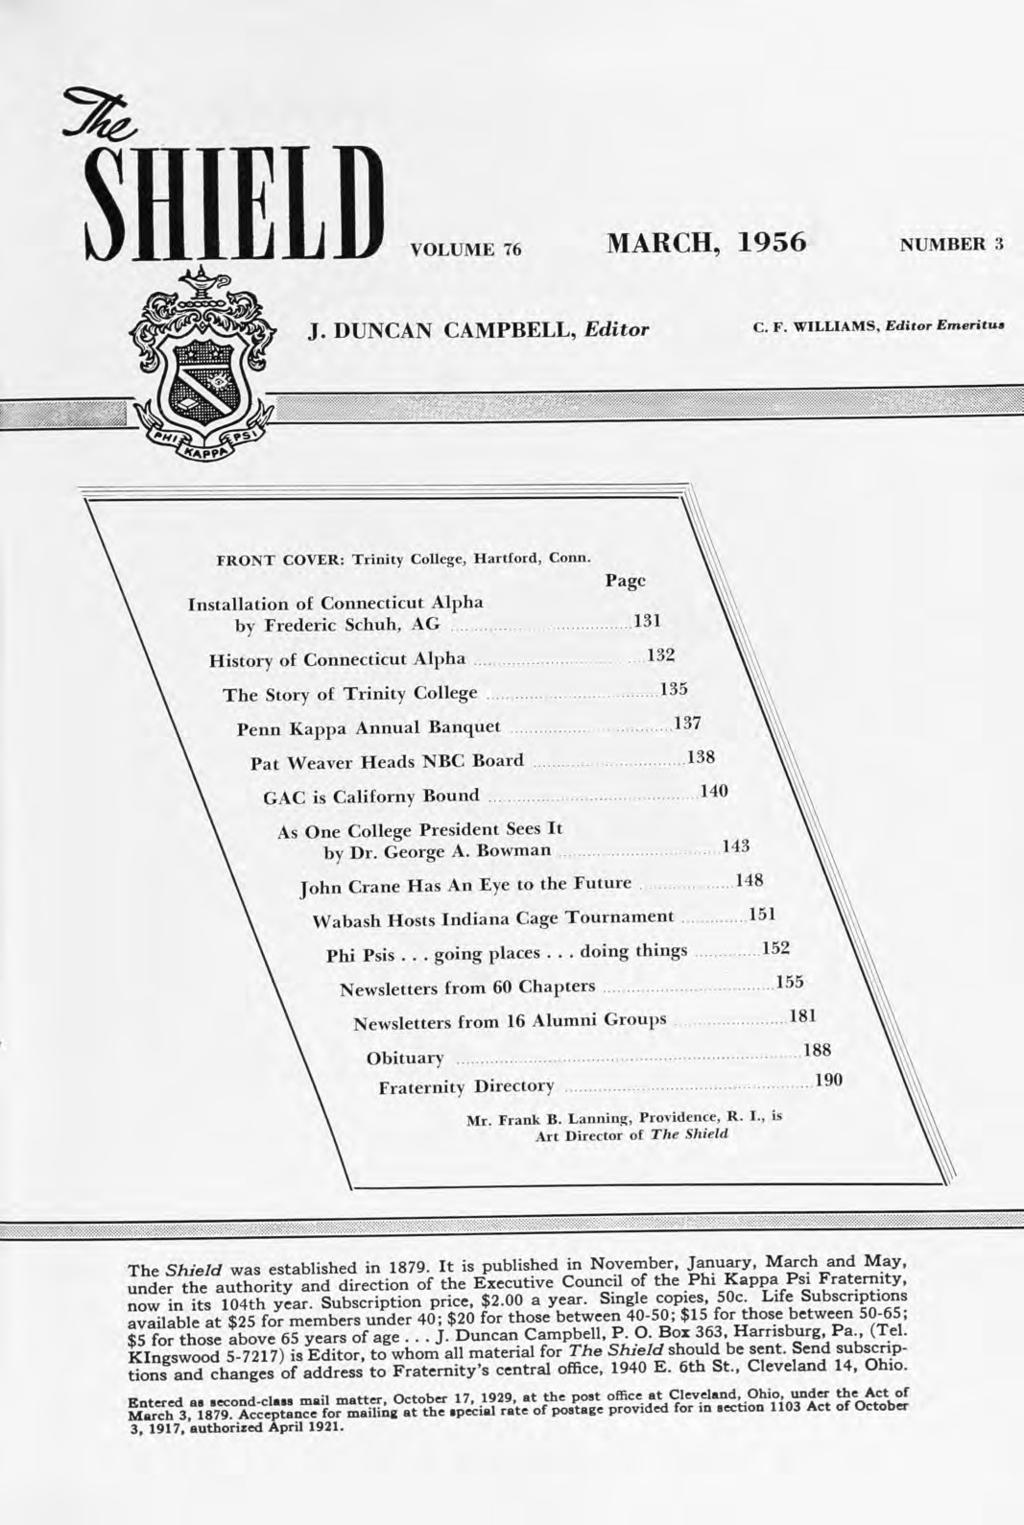 SHIELD VOLUME 76 MARCH, 1956 NUMBER 3 J. DUNCAN CAMPBELL, Editor C. F. WILLIAMS, Editor Emeritus FRONT COVER: Trinity College, Hartford, Conn.